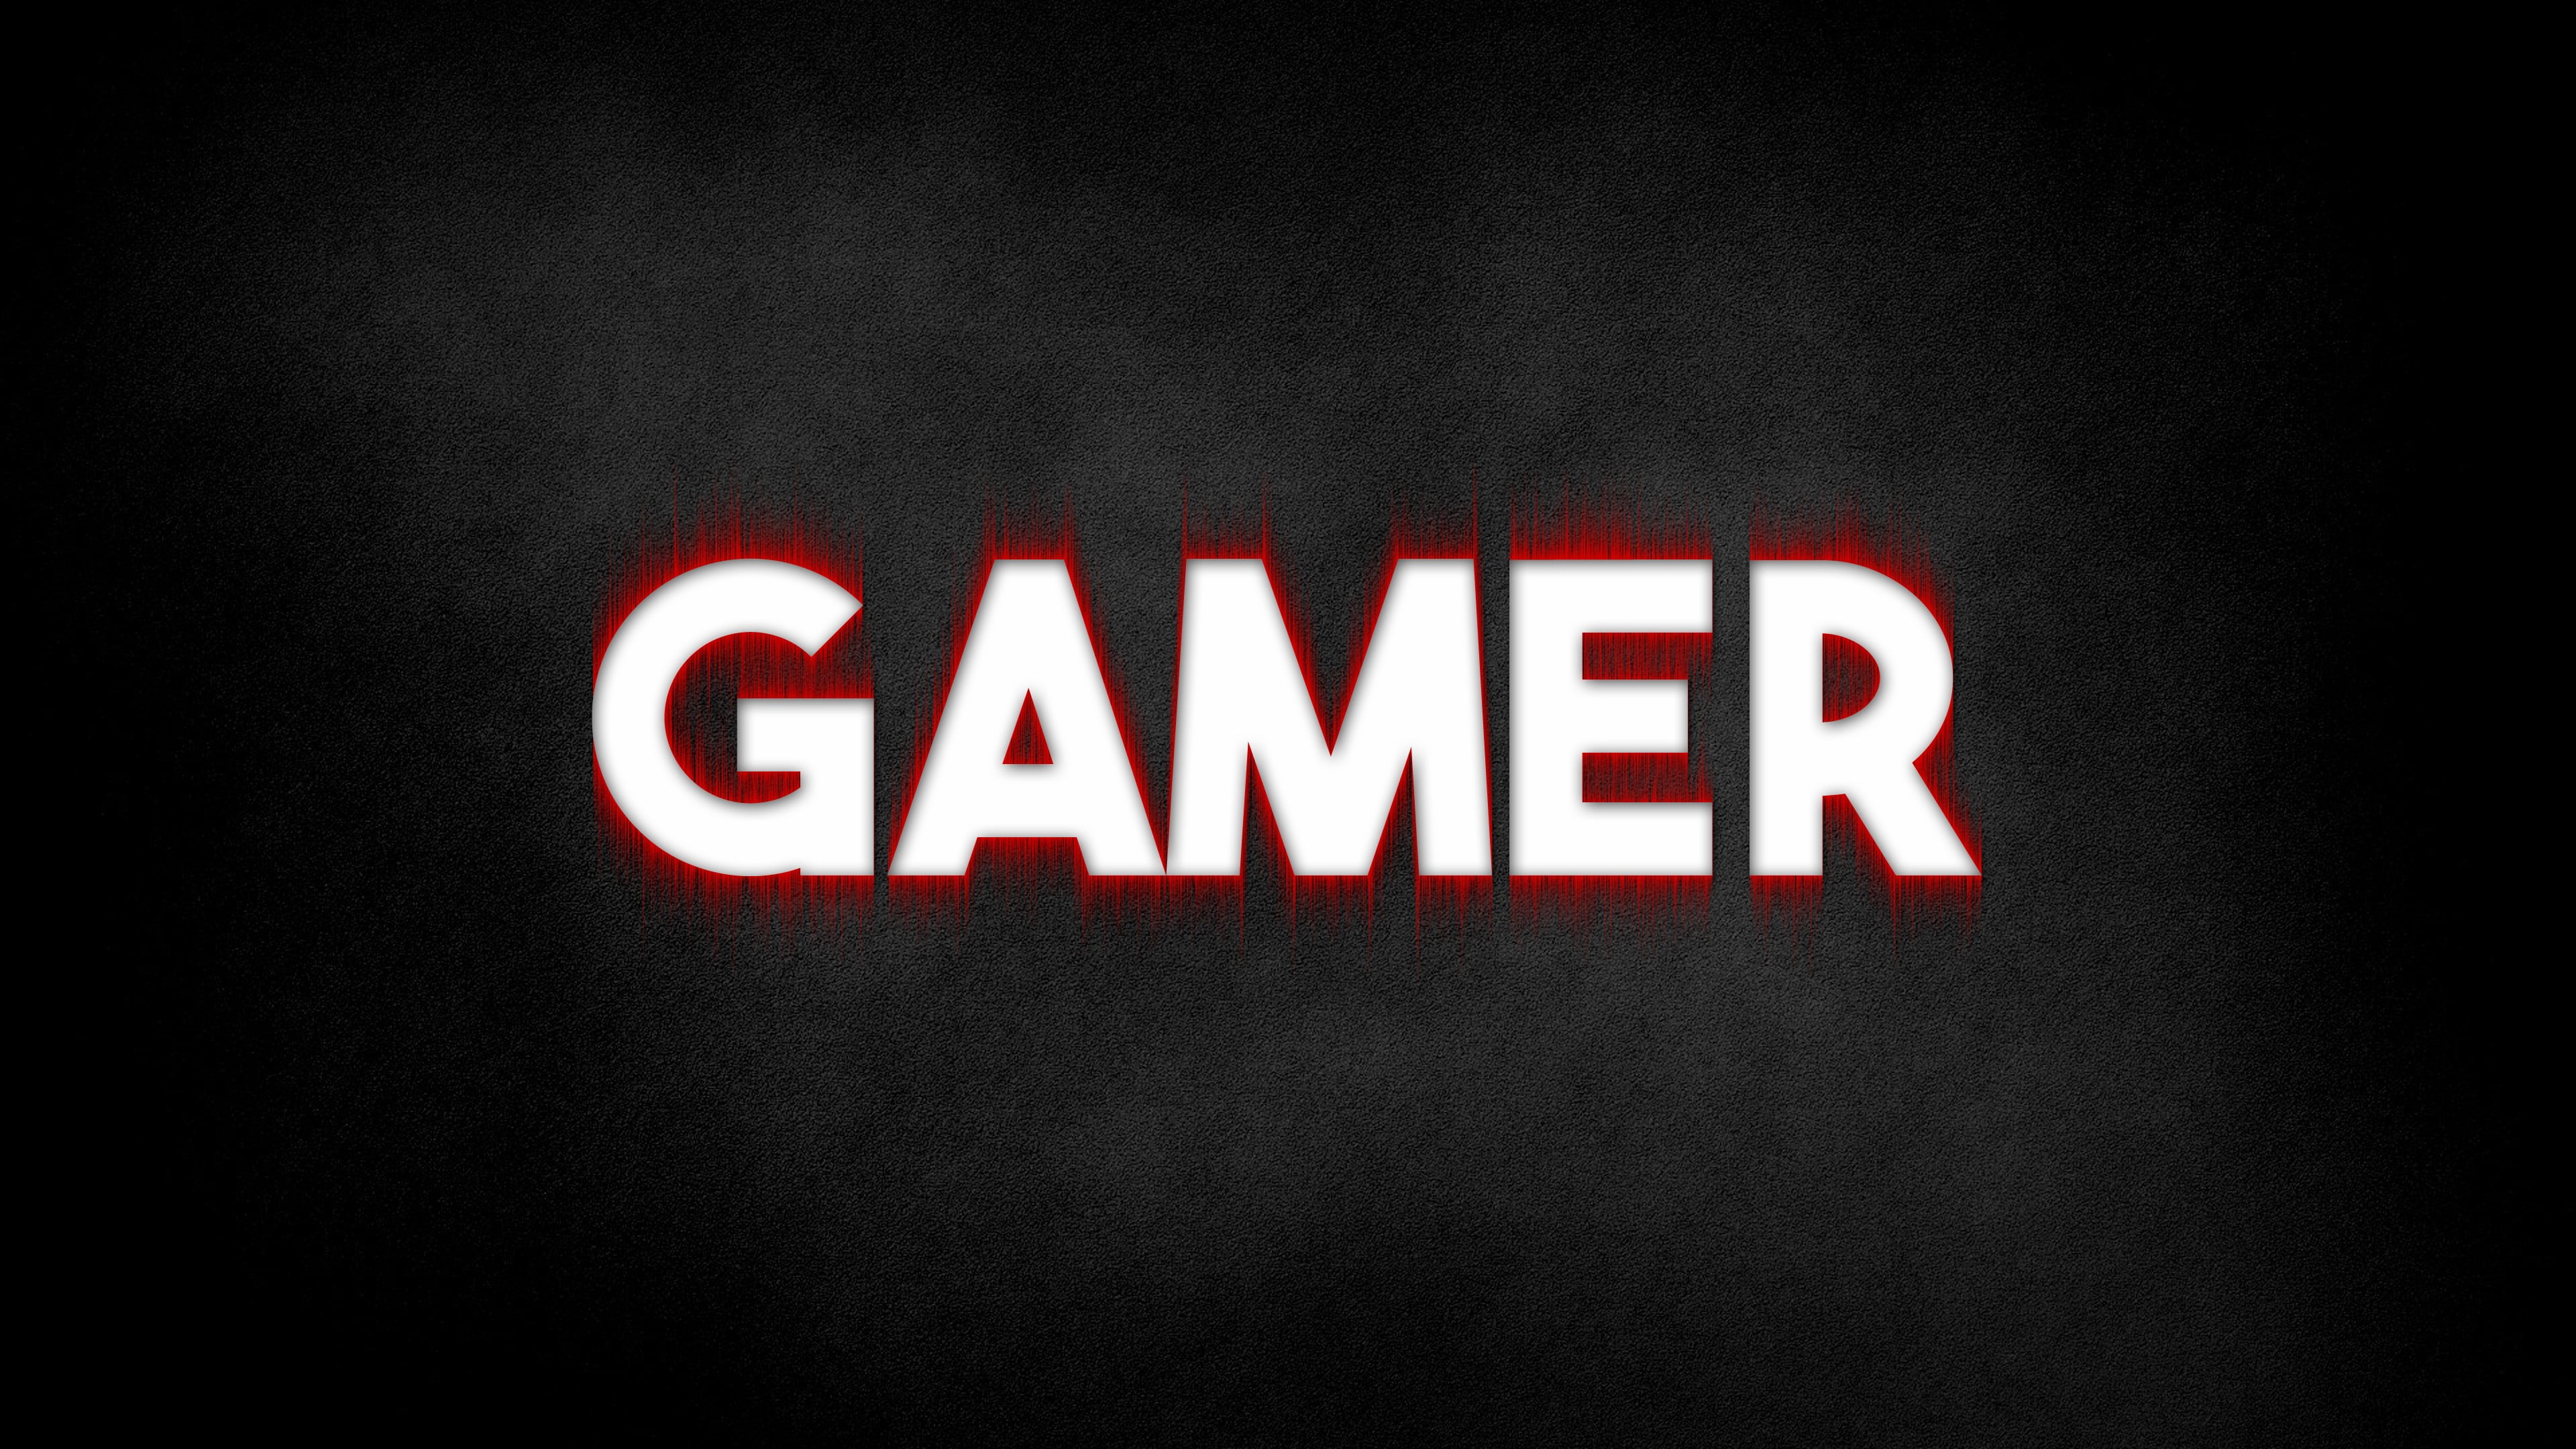 white gamer text, gamers, red, destructured, western script, communication